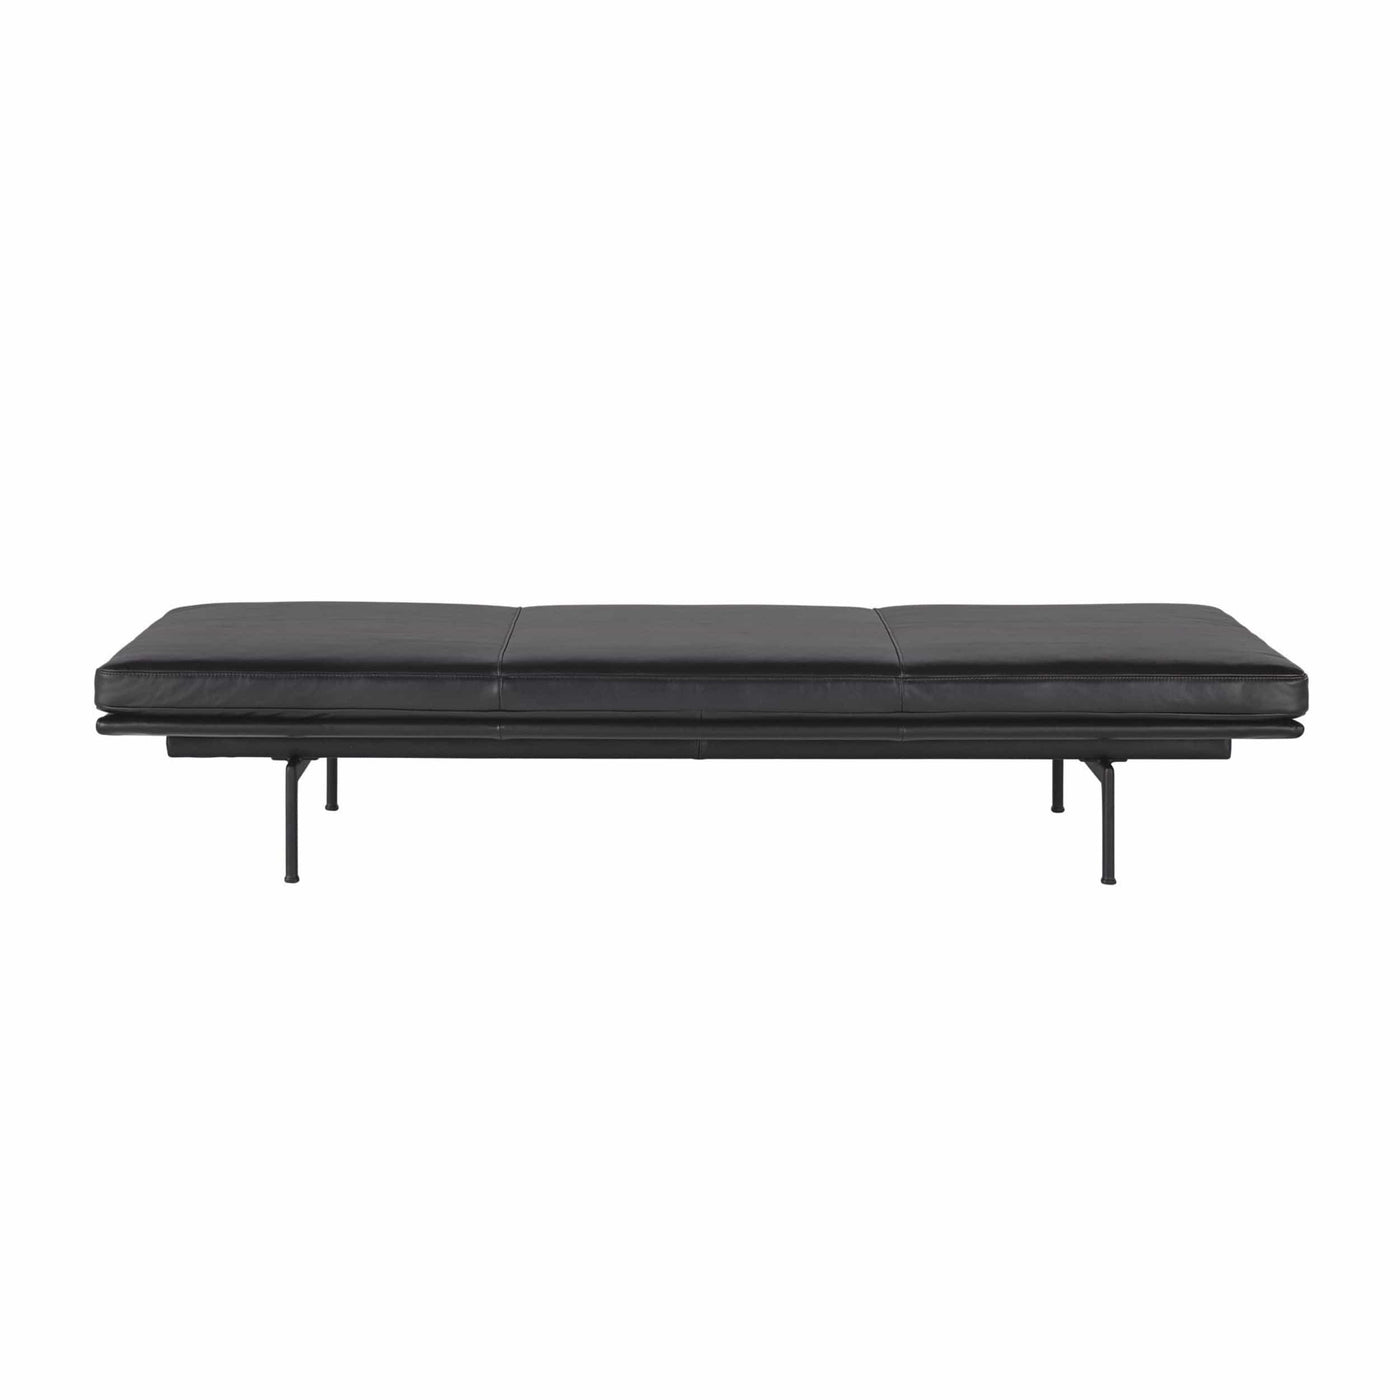 Muuto Outline Daybed in black refine leather and black steel base. Made to order from someday designs. #colour_black-refine-leather